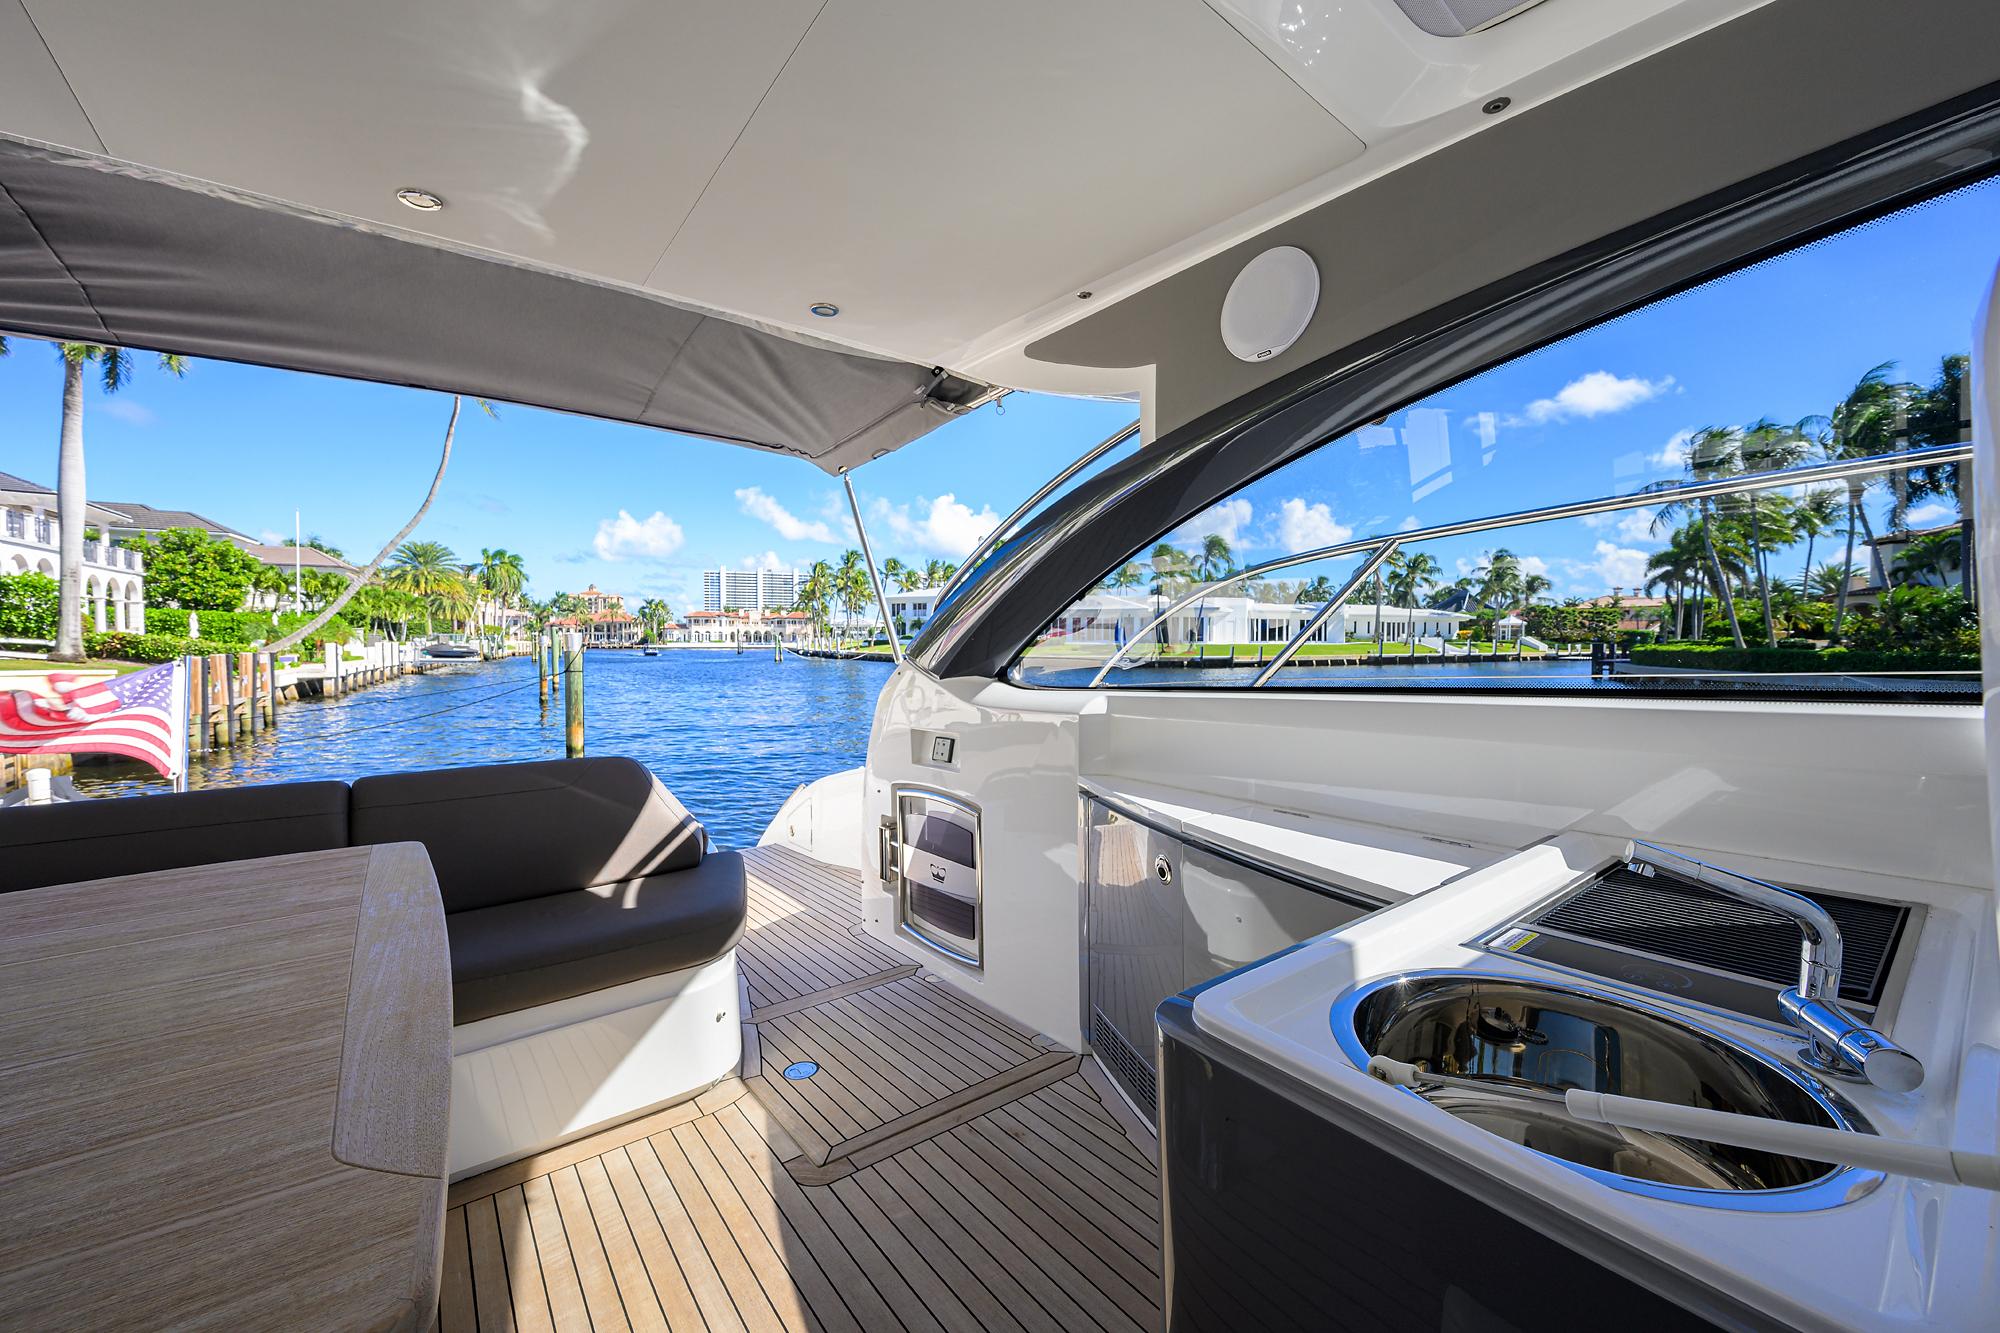 Princess V50 TraSeas - Aft Deck Sink and Grill